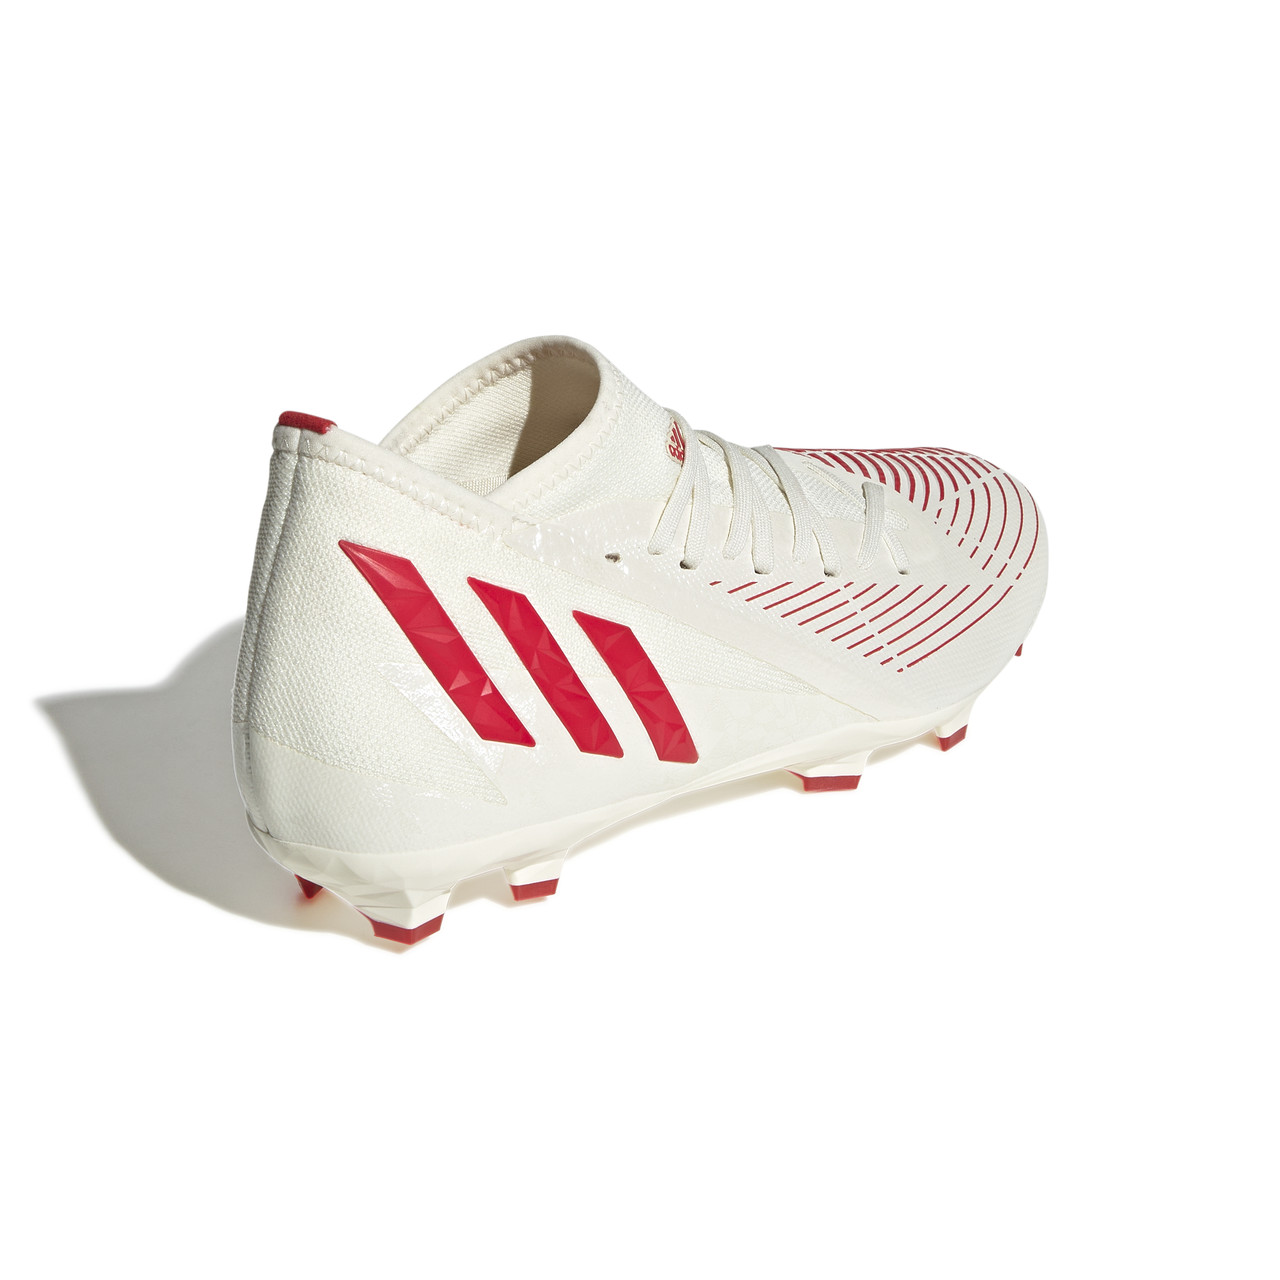 adidas Predator Firm Ground Cleats White-Red - Chicago Soccer